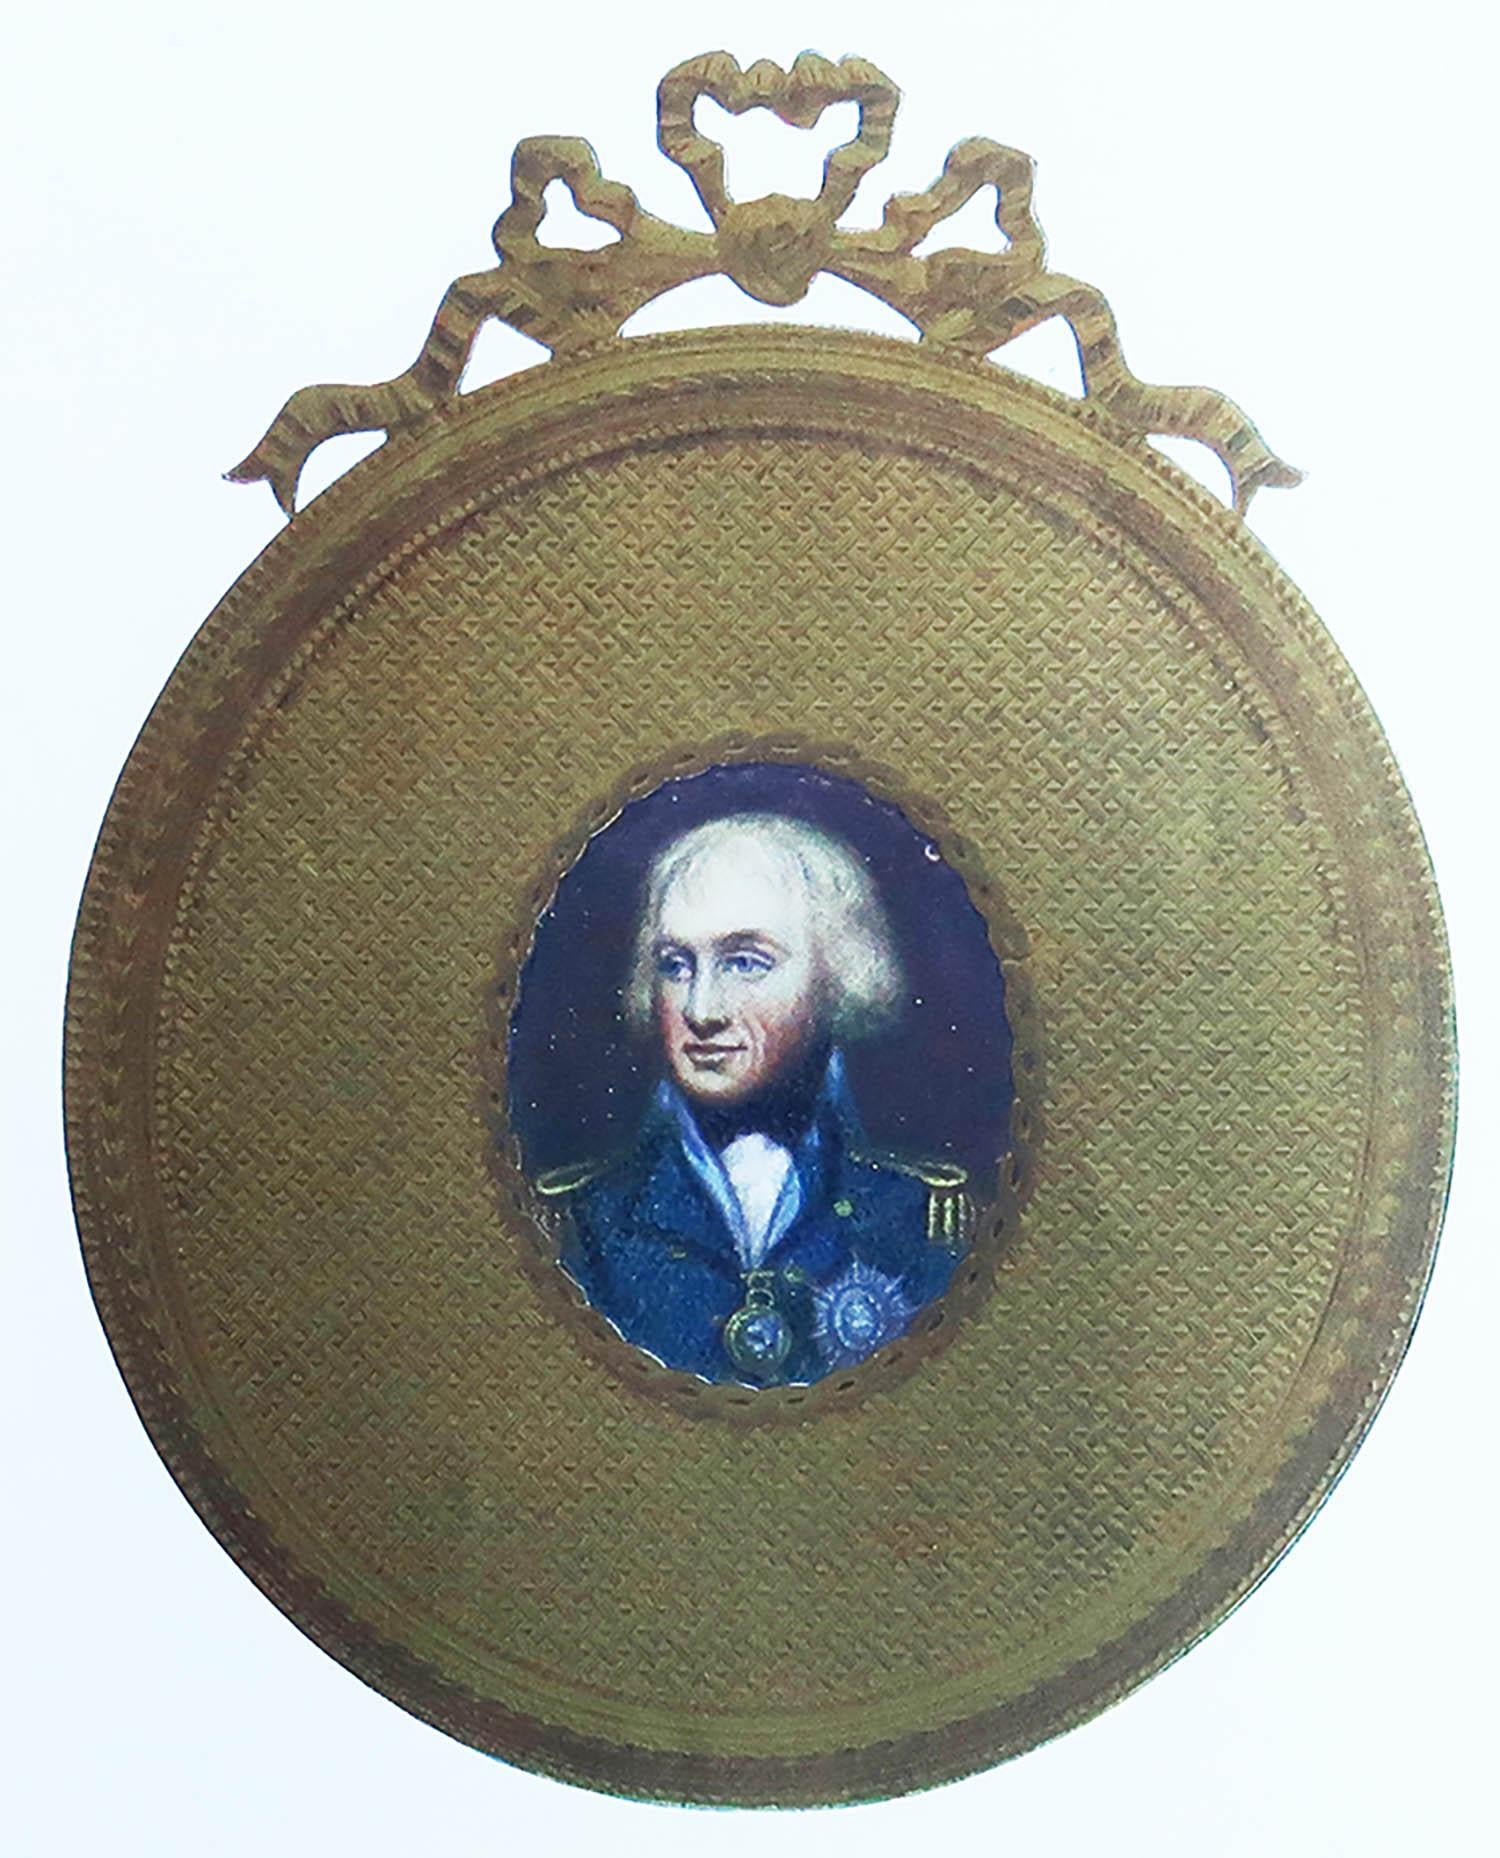 A wonderful print of A Nelson portrait miniature

Amazing illuminated gold

Chromolithograph 

Published by Connoisseur, circa 1900

Unframed.

